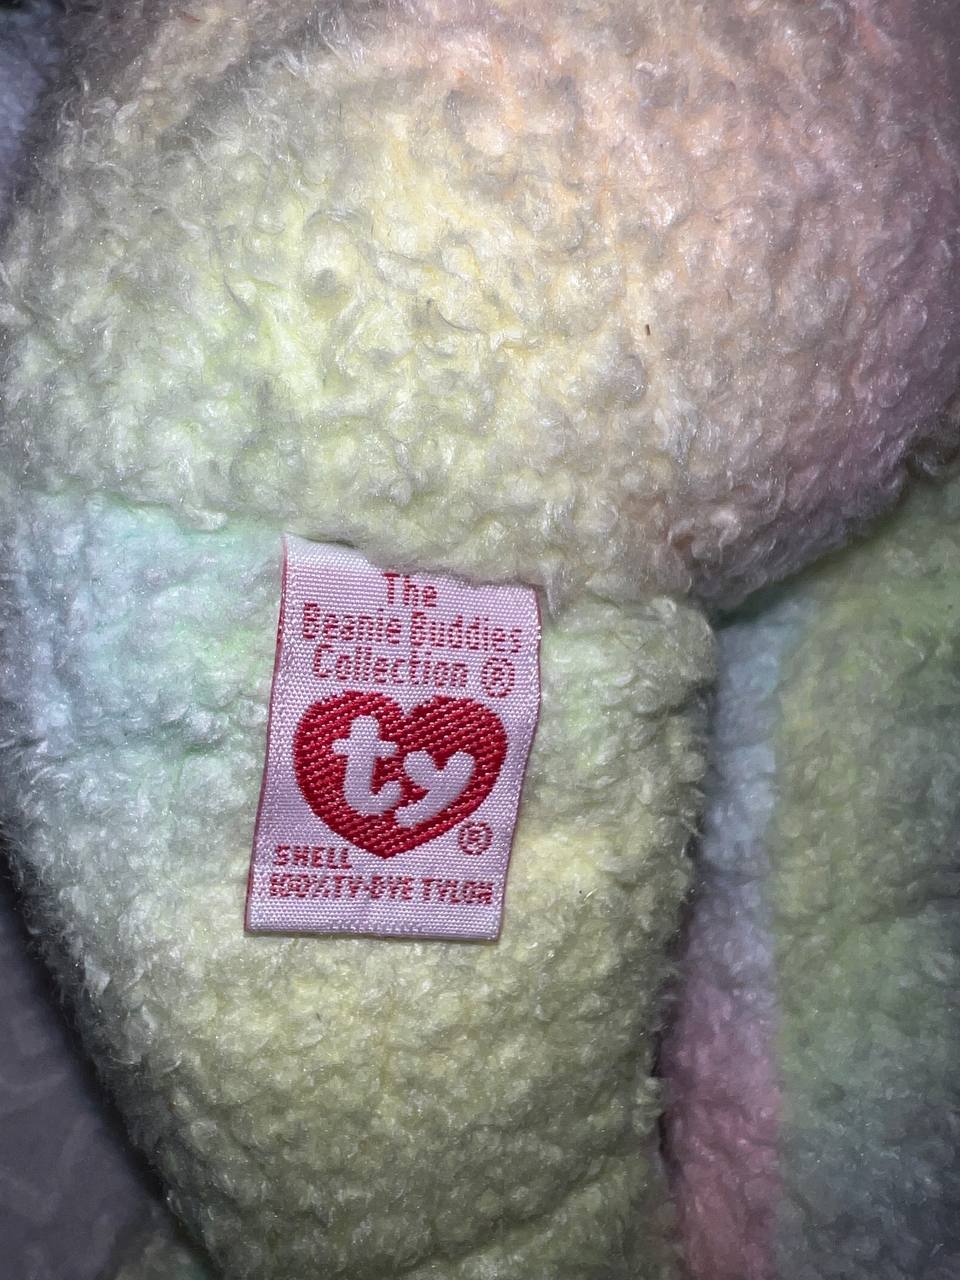 *RARE* MINT Groovy Beanie Baby 1999 With Tag